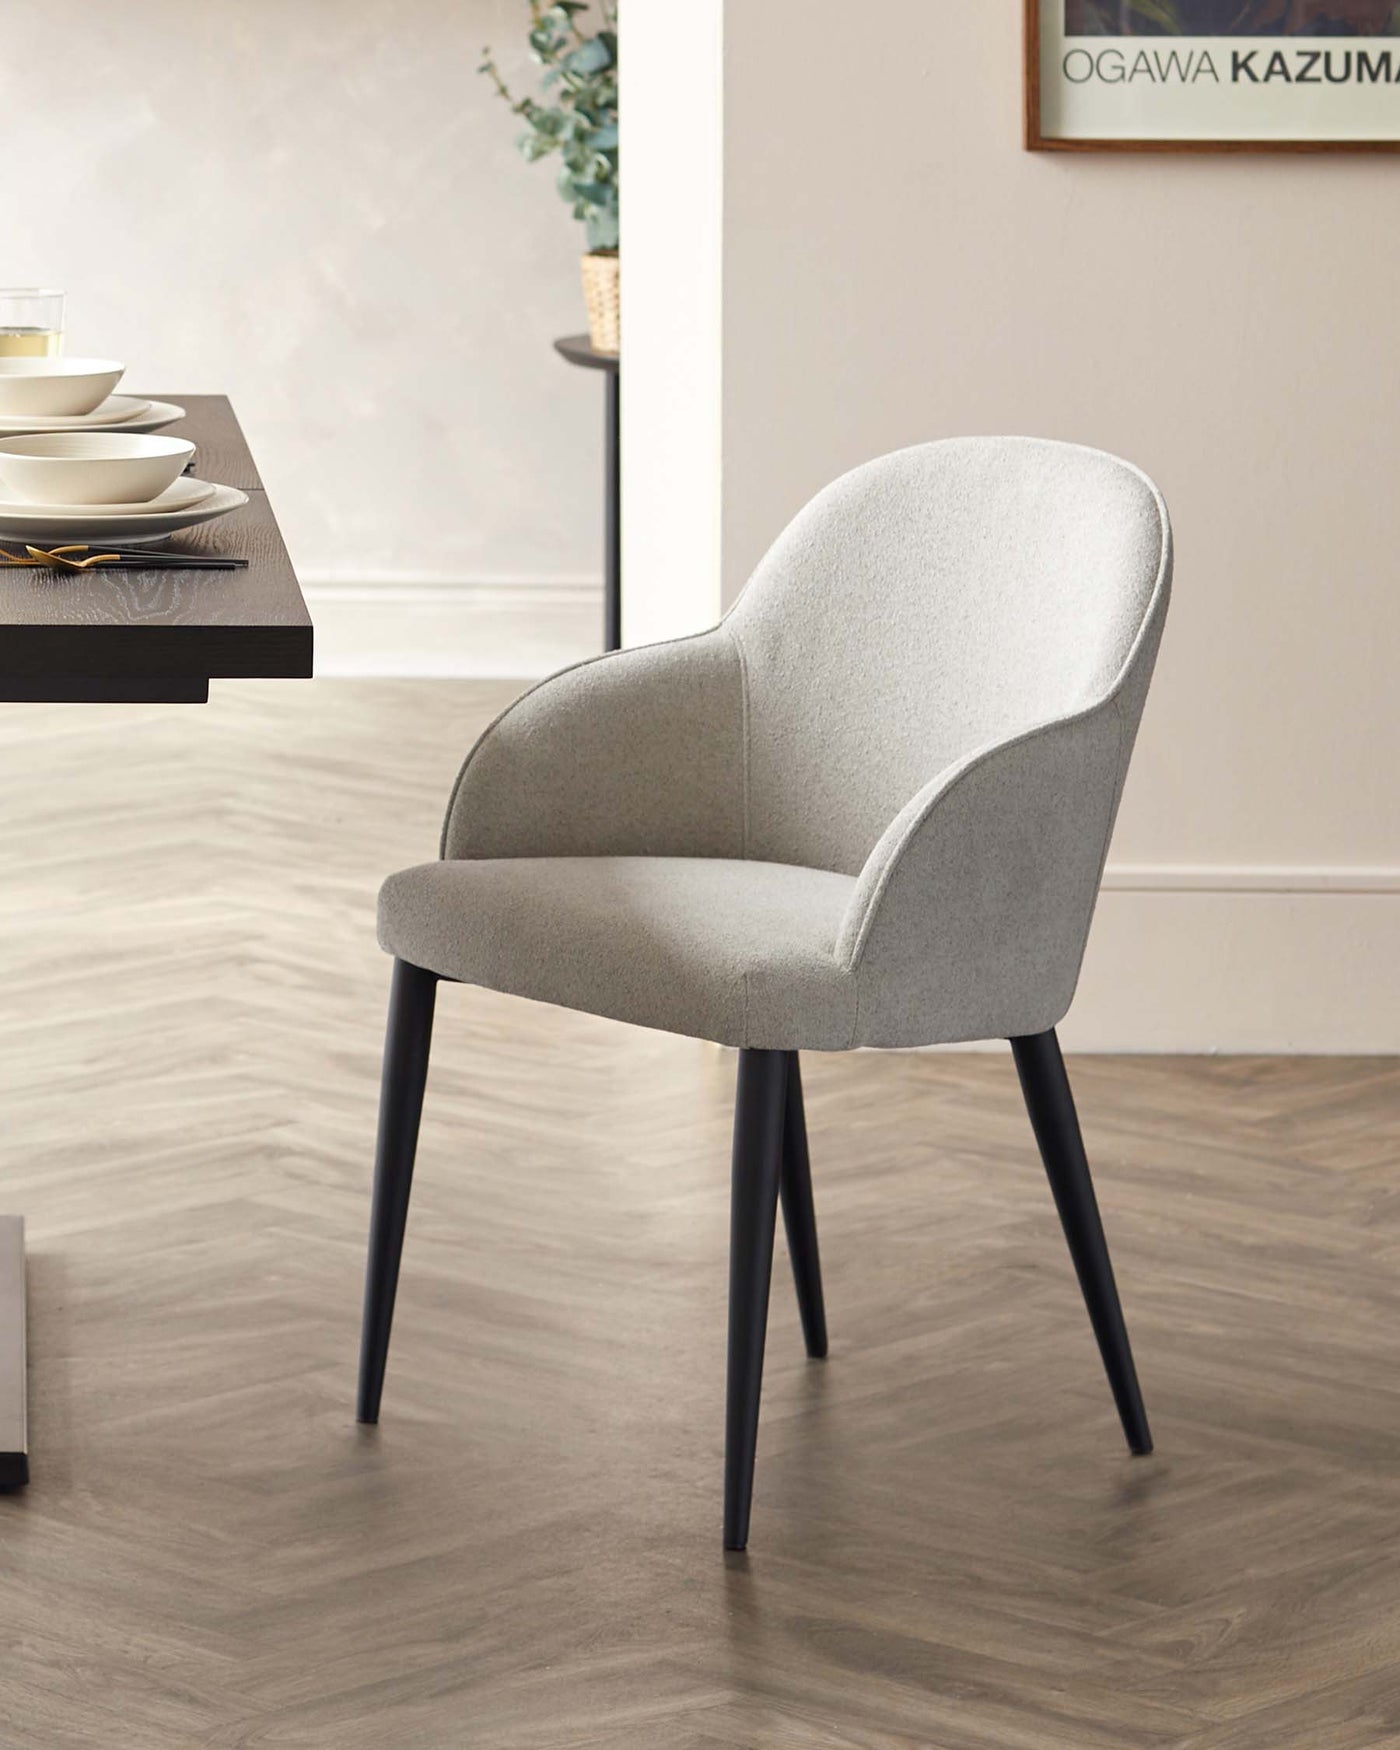 Modern light grey upholstered dining chair with a curved back and seat design, featuring dark tapered wooden legs.